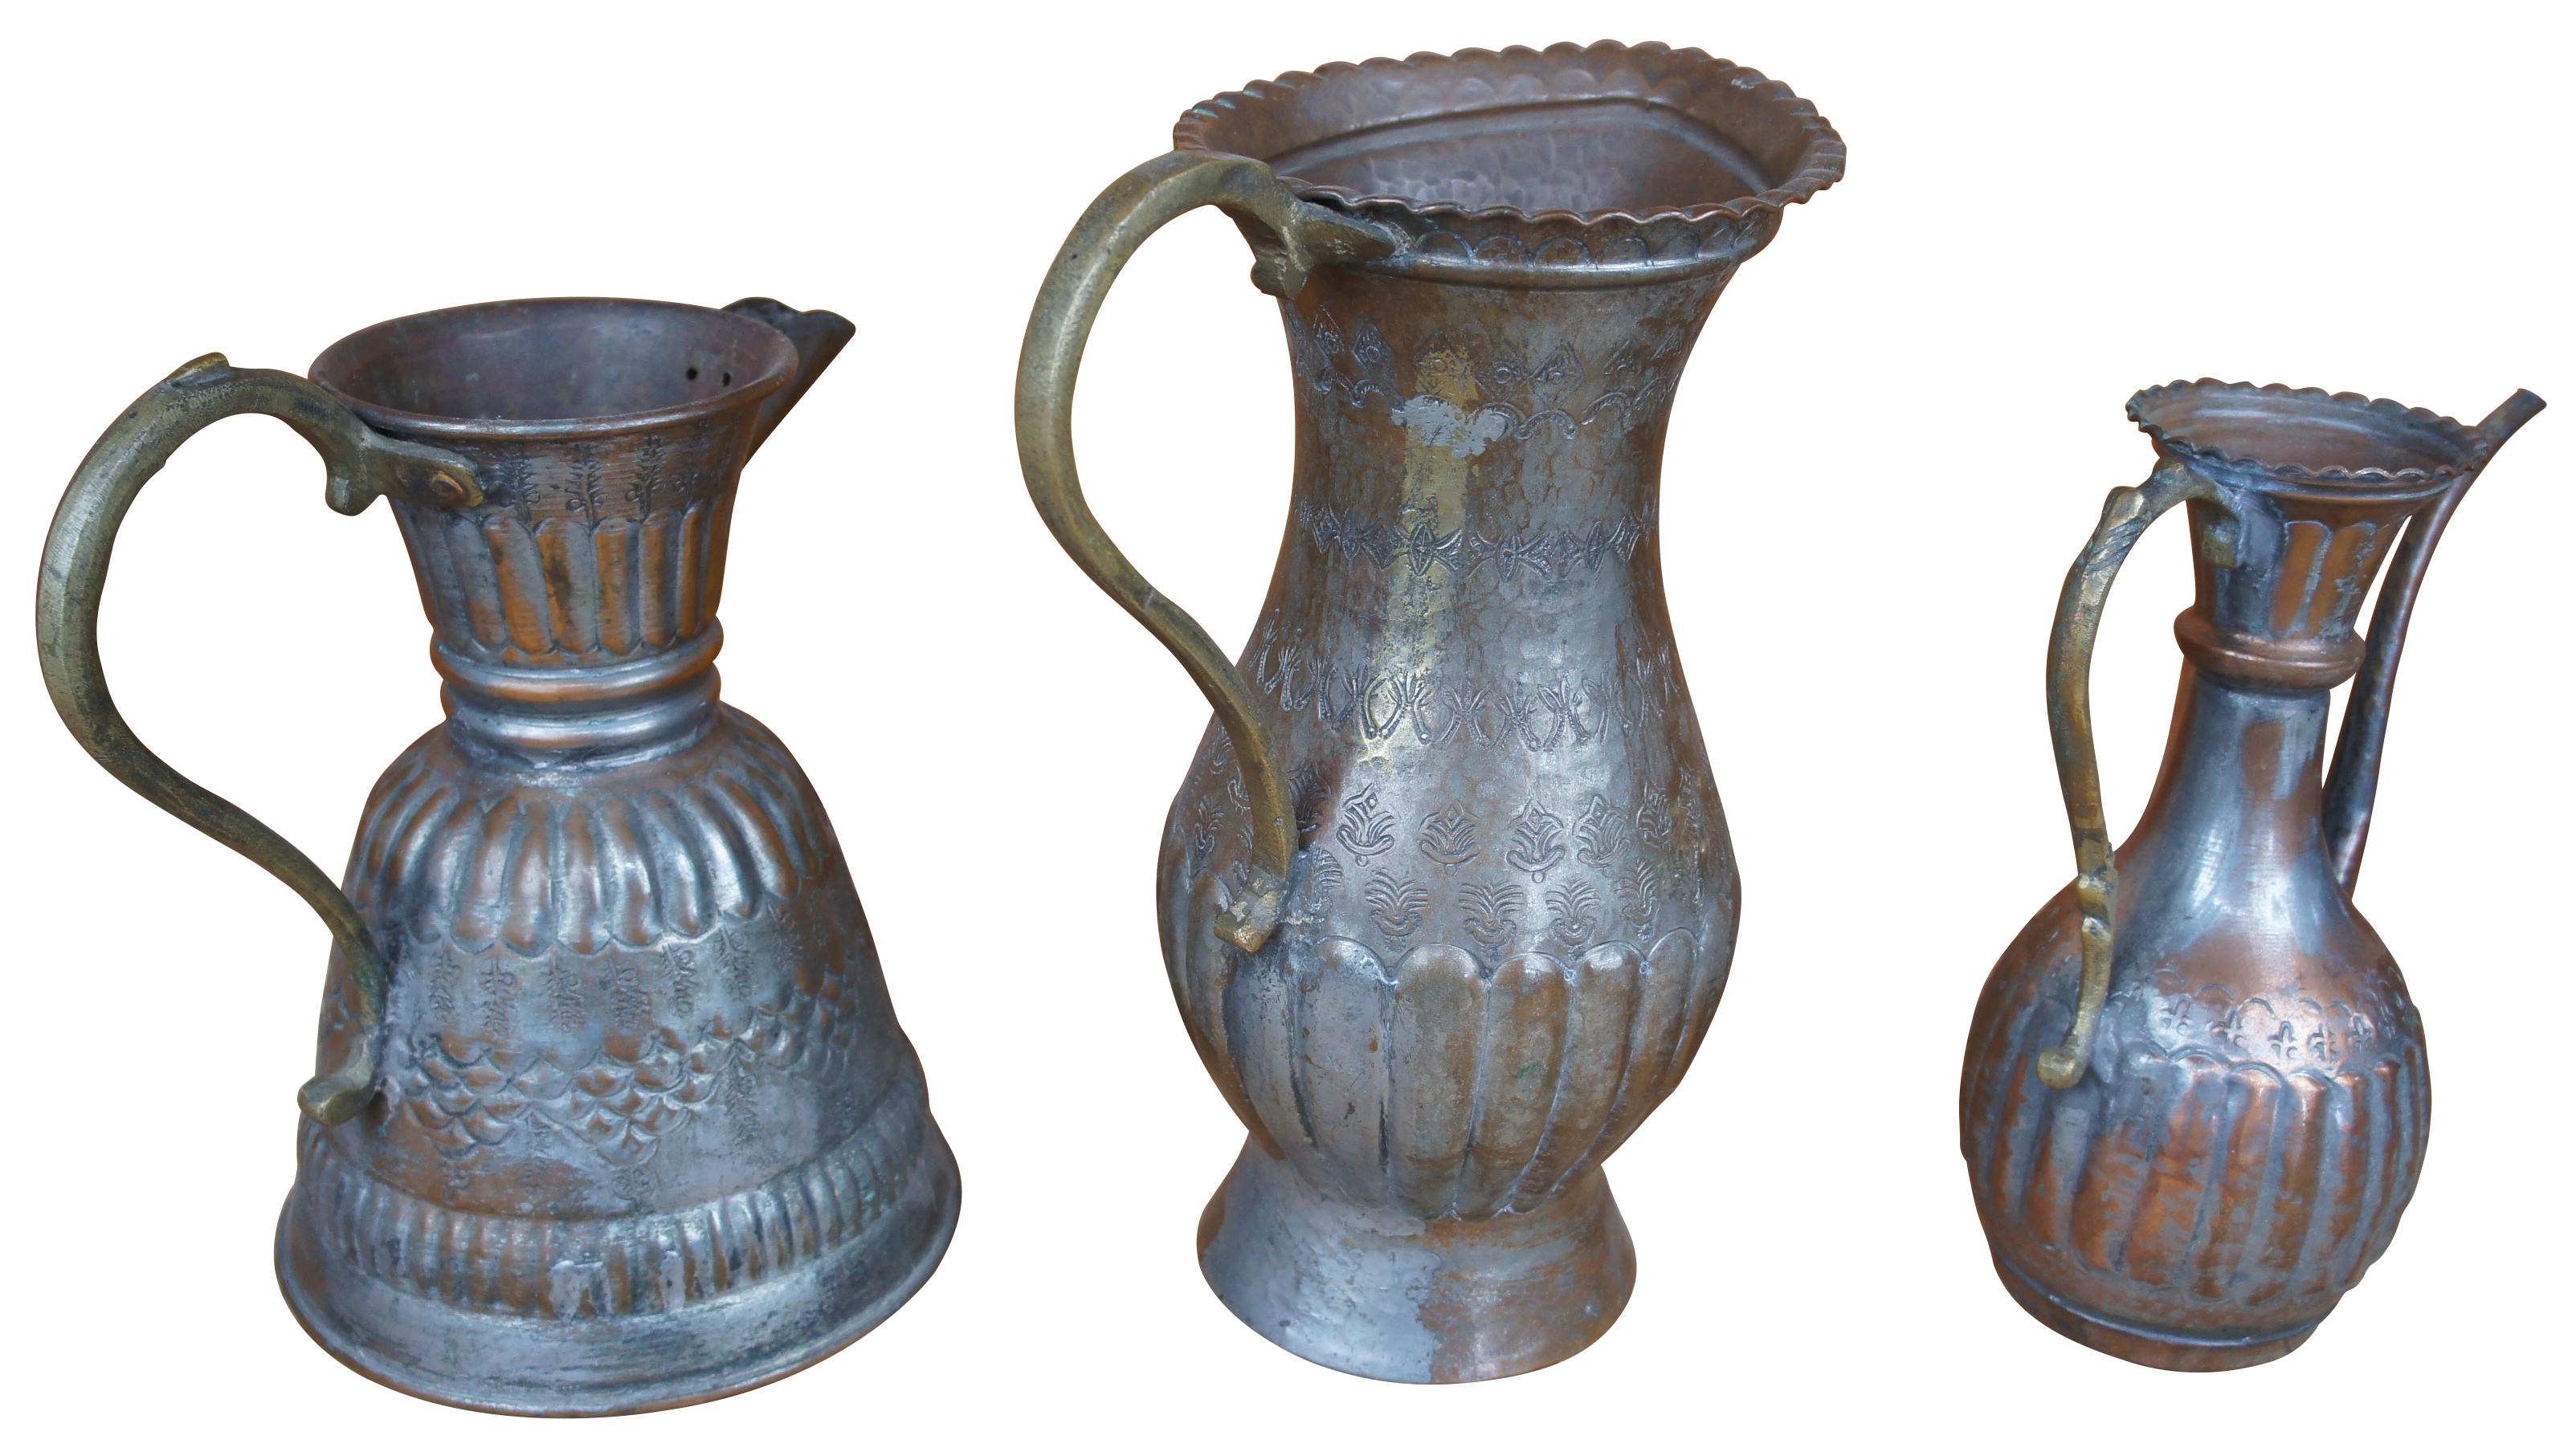 Three of assorted hammered copper pitchers featuring various designs and styles with fleur de lis and ribbed accents, and scrolled handles. One features a bonsai gooseneck spout. Stamped with ‘Egypt’ on the bottom.

tallest- 9